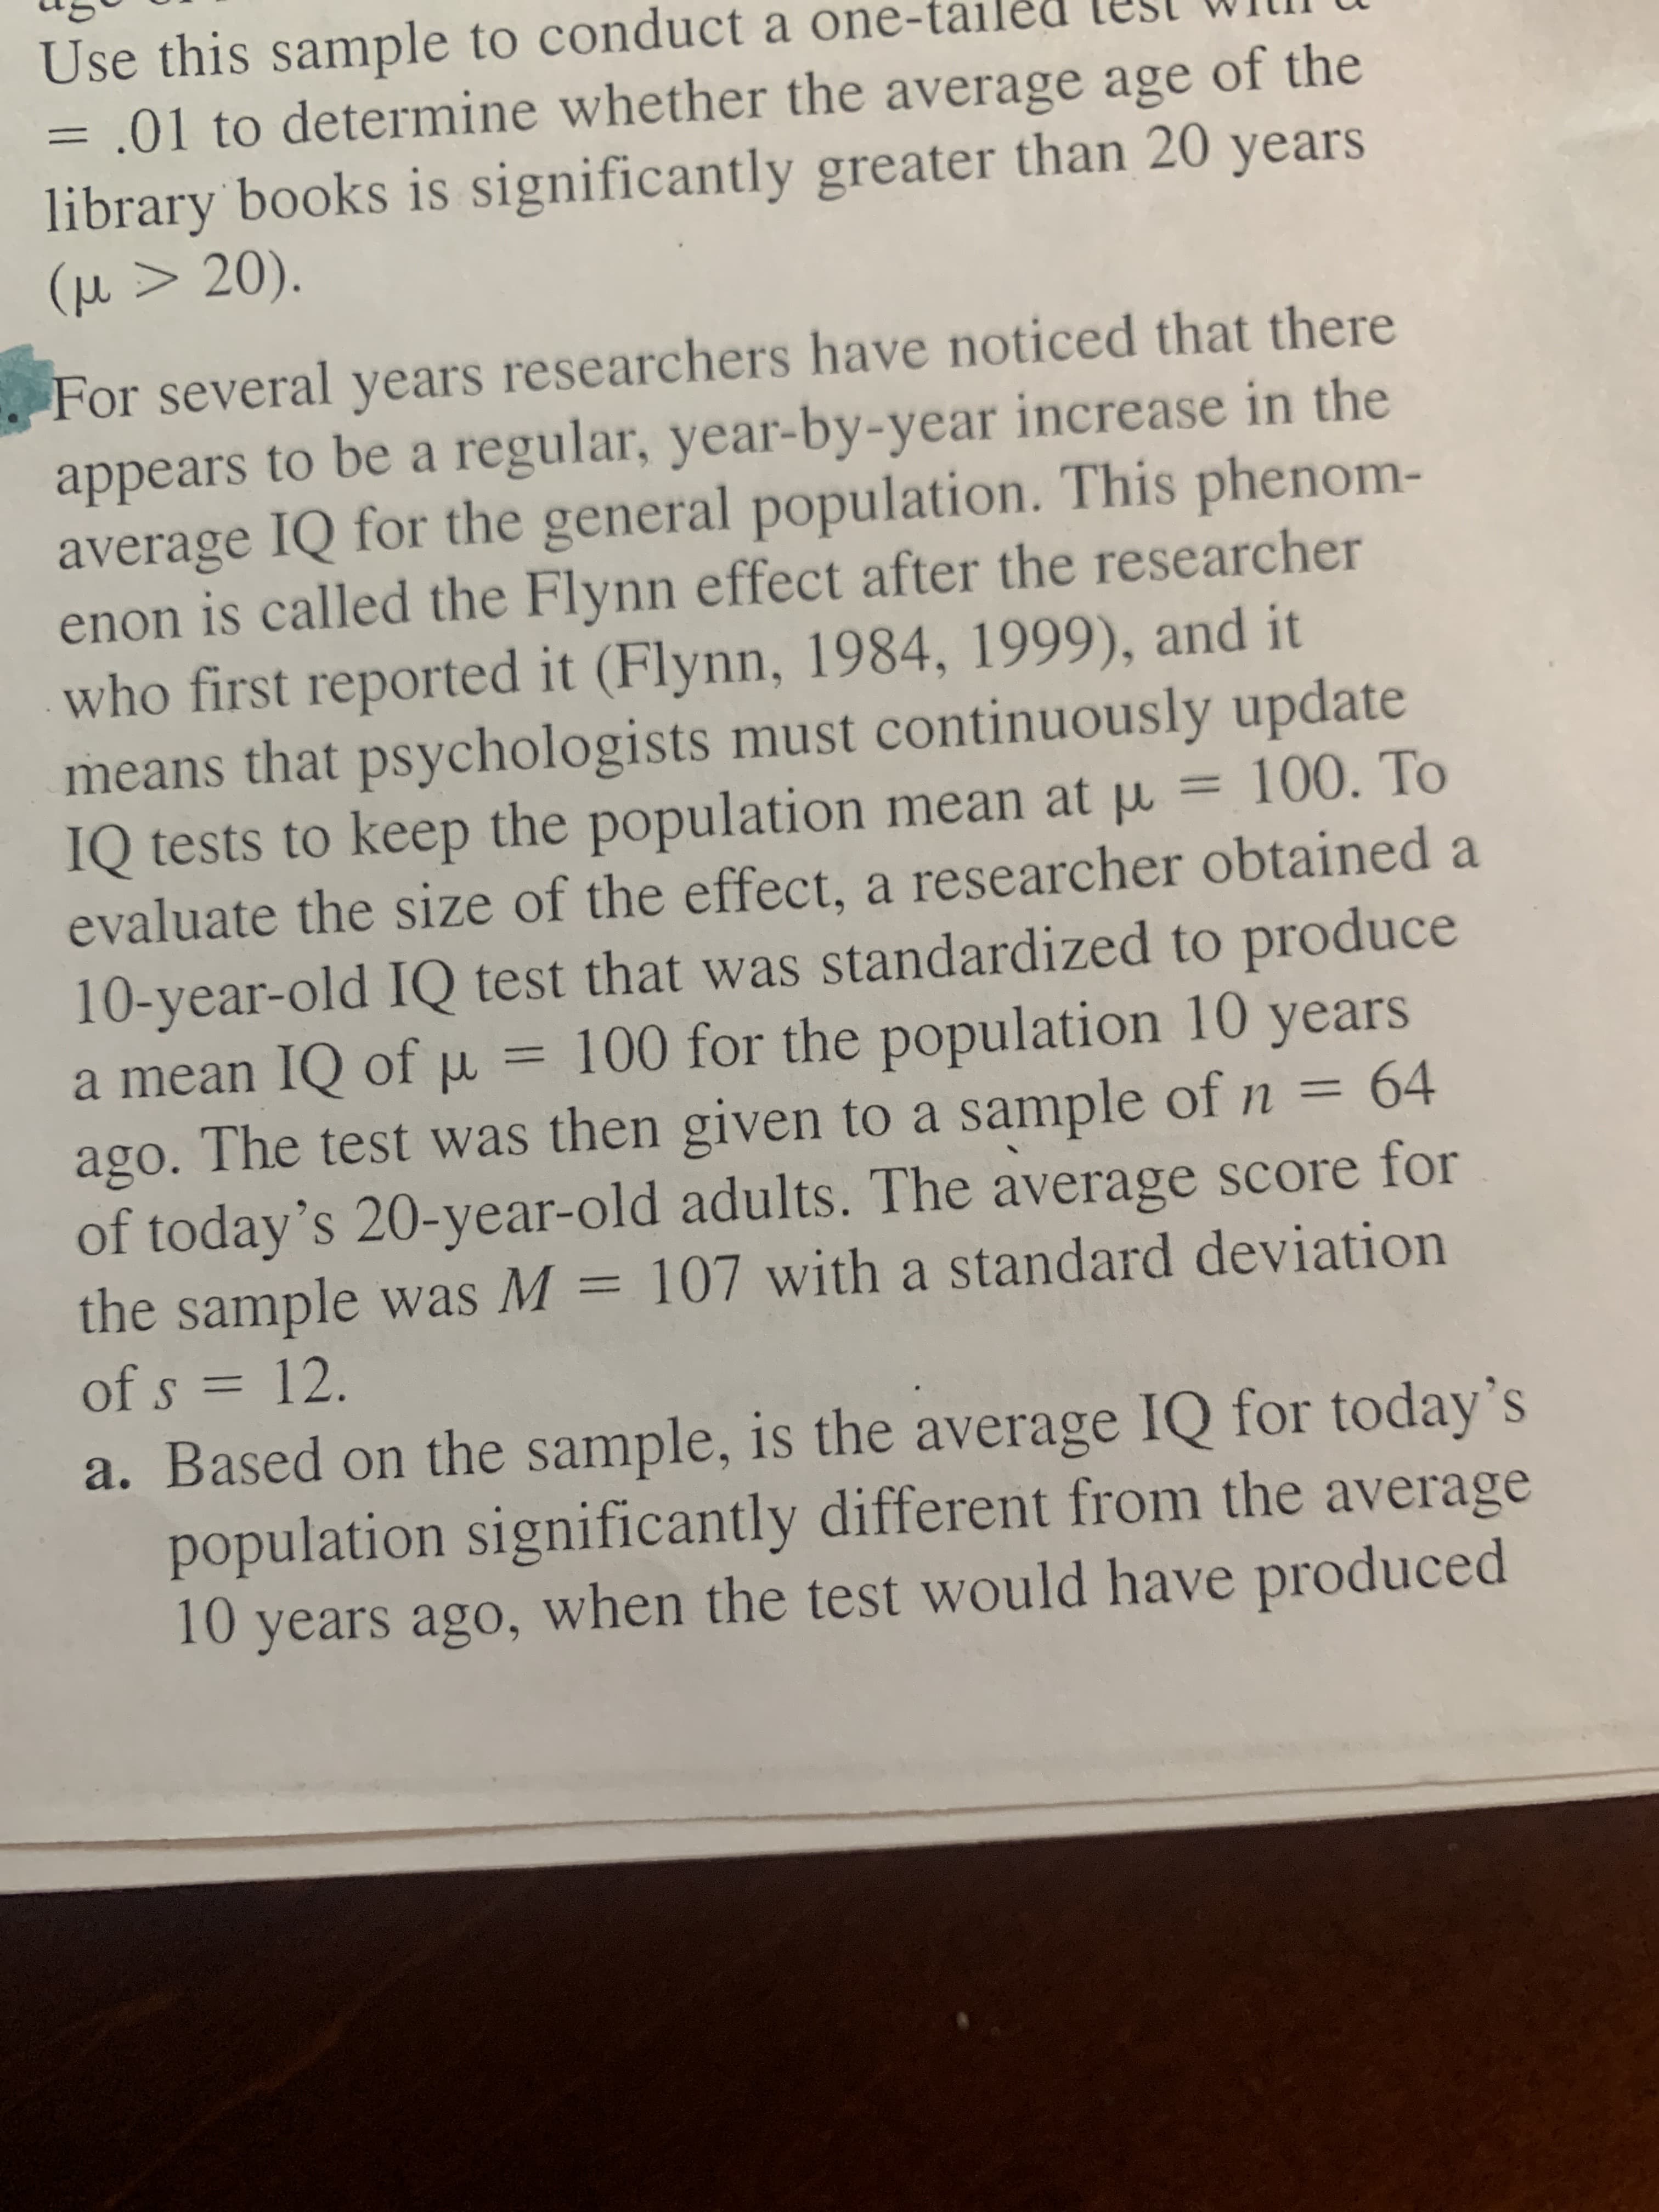 For several years researchers have noticed that there
appears to be a regular, year-by-year increase in the
average IQ for the general population. This phenom-
enon is called the Flynn effect after the researcher
00) and it
